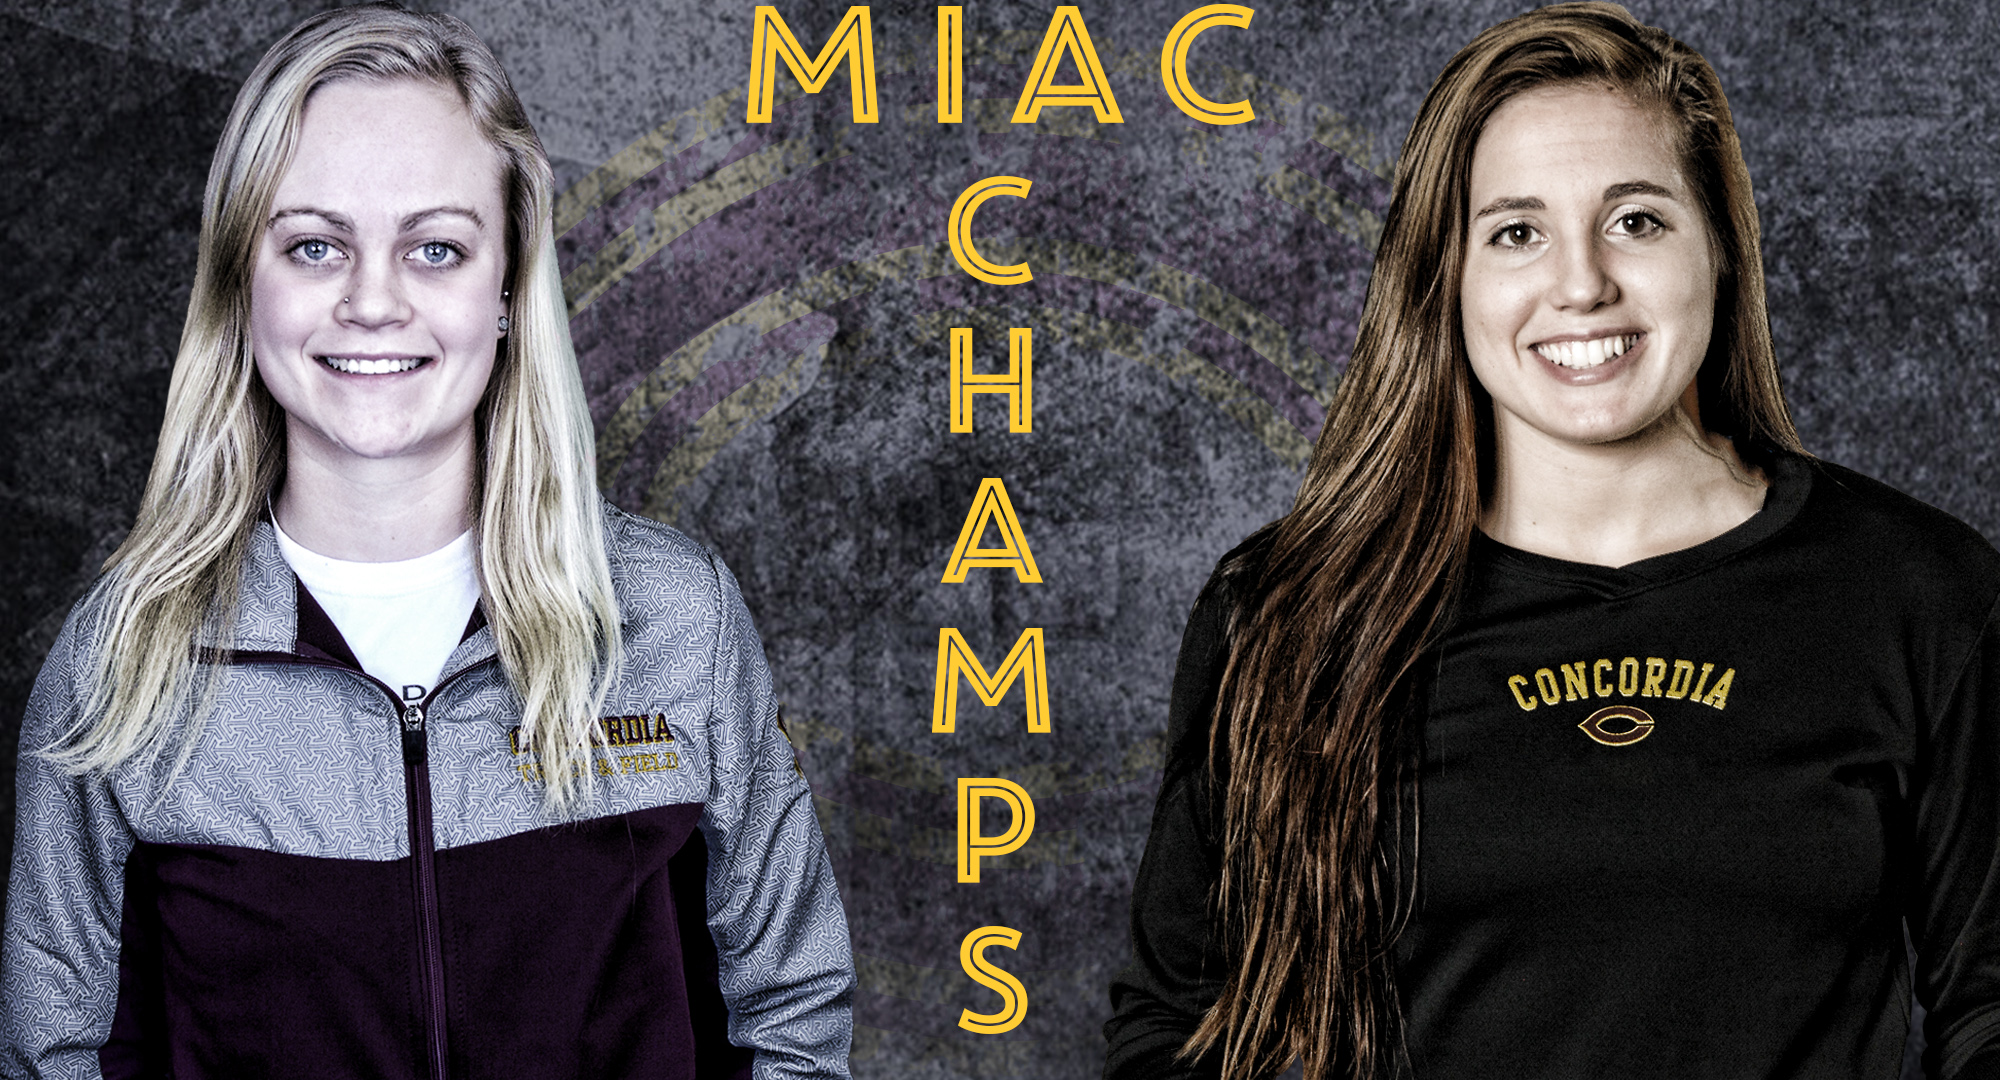 Mikayla Forness (L) and Mandy Mercil won individual events on Day 1 at the MIAC Outdoor Championship Meet.